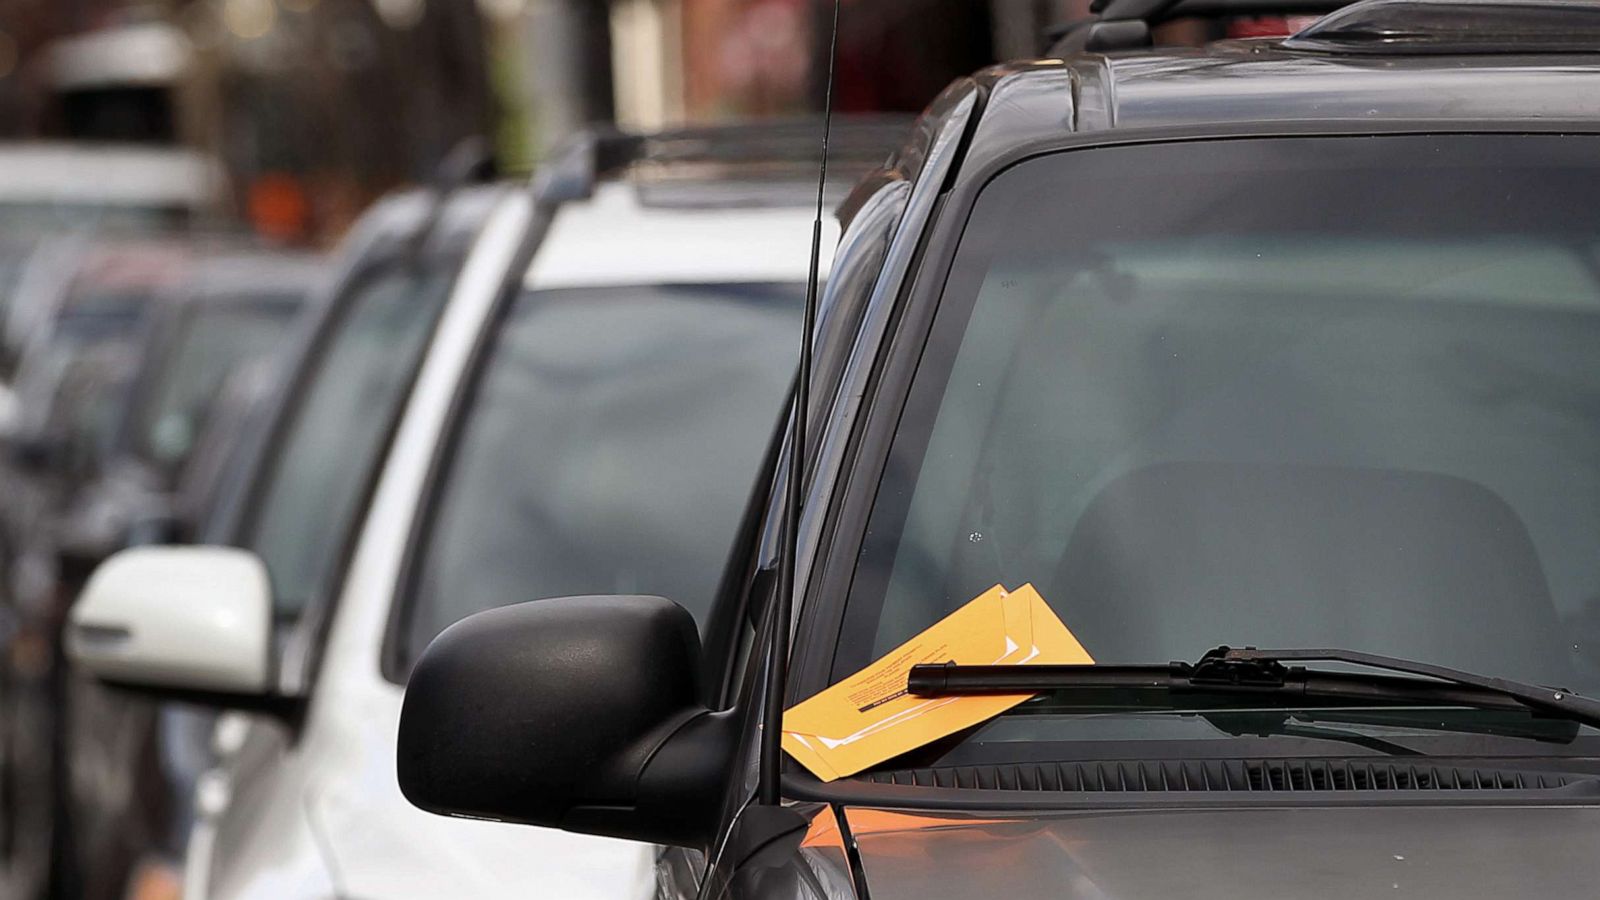 The Insider's Guide to Getting Out of a Parking Ticket in Boston